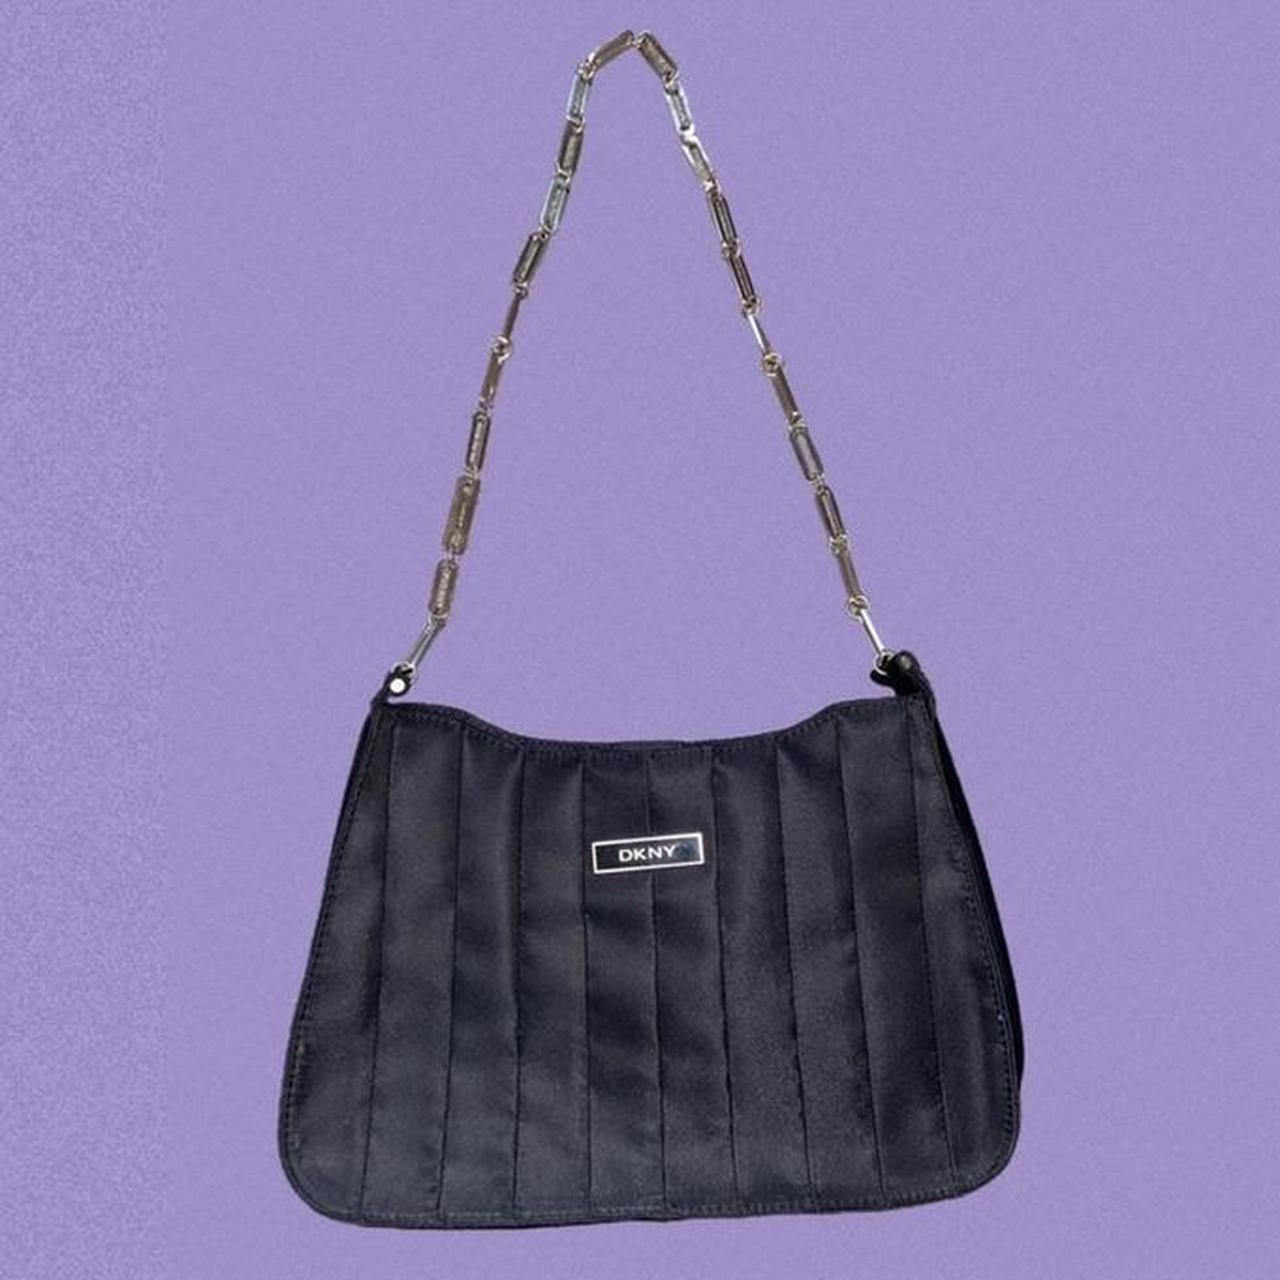 Product Image 1 - Black DKNY
-
This bag is one